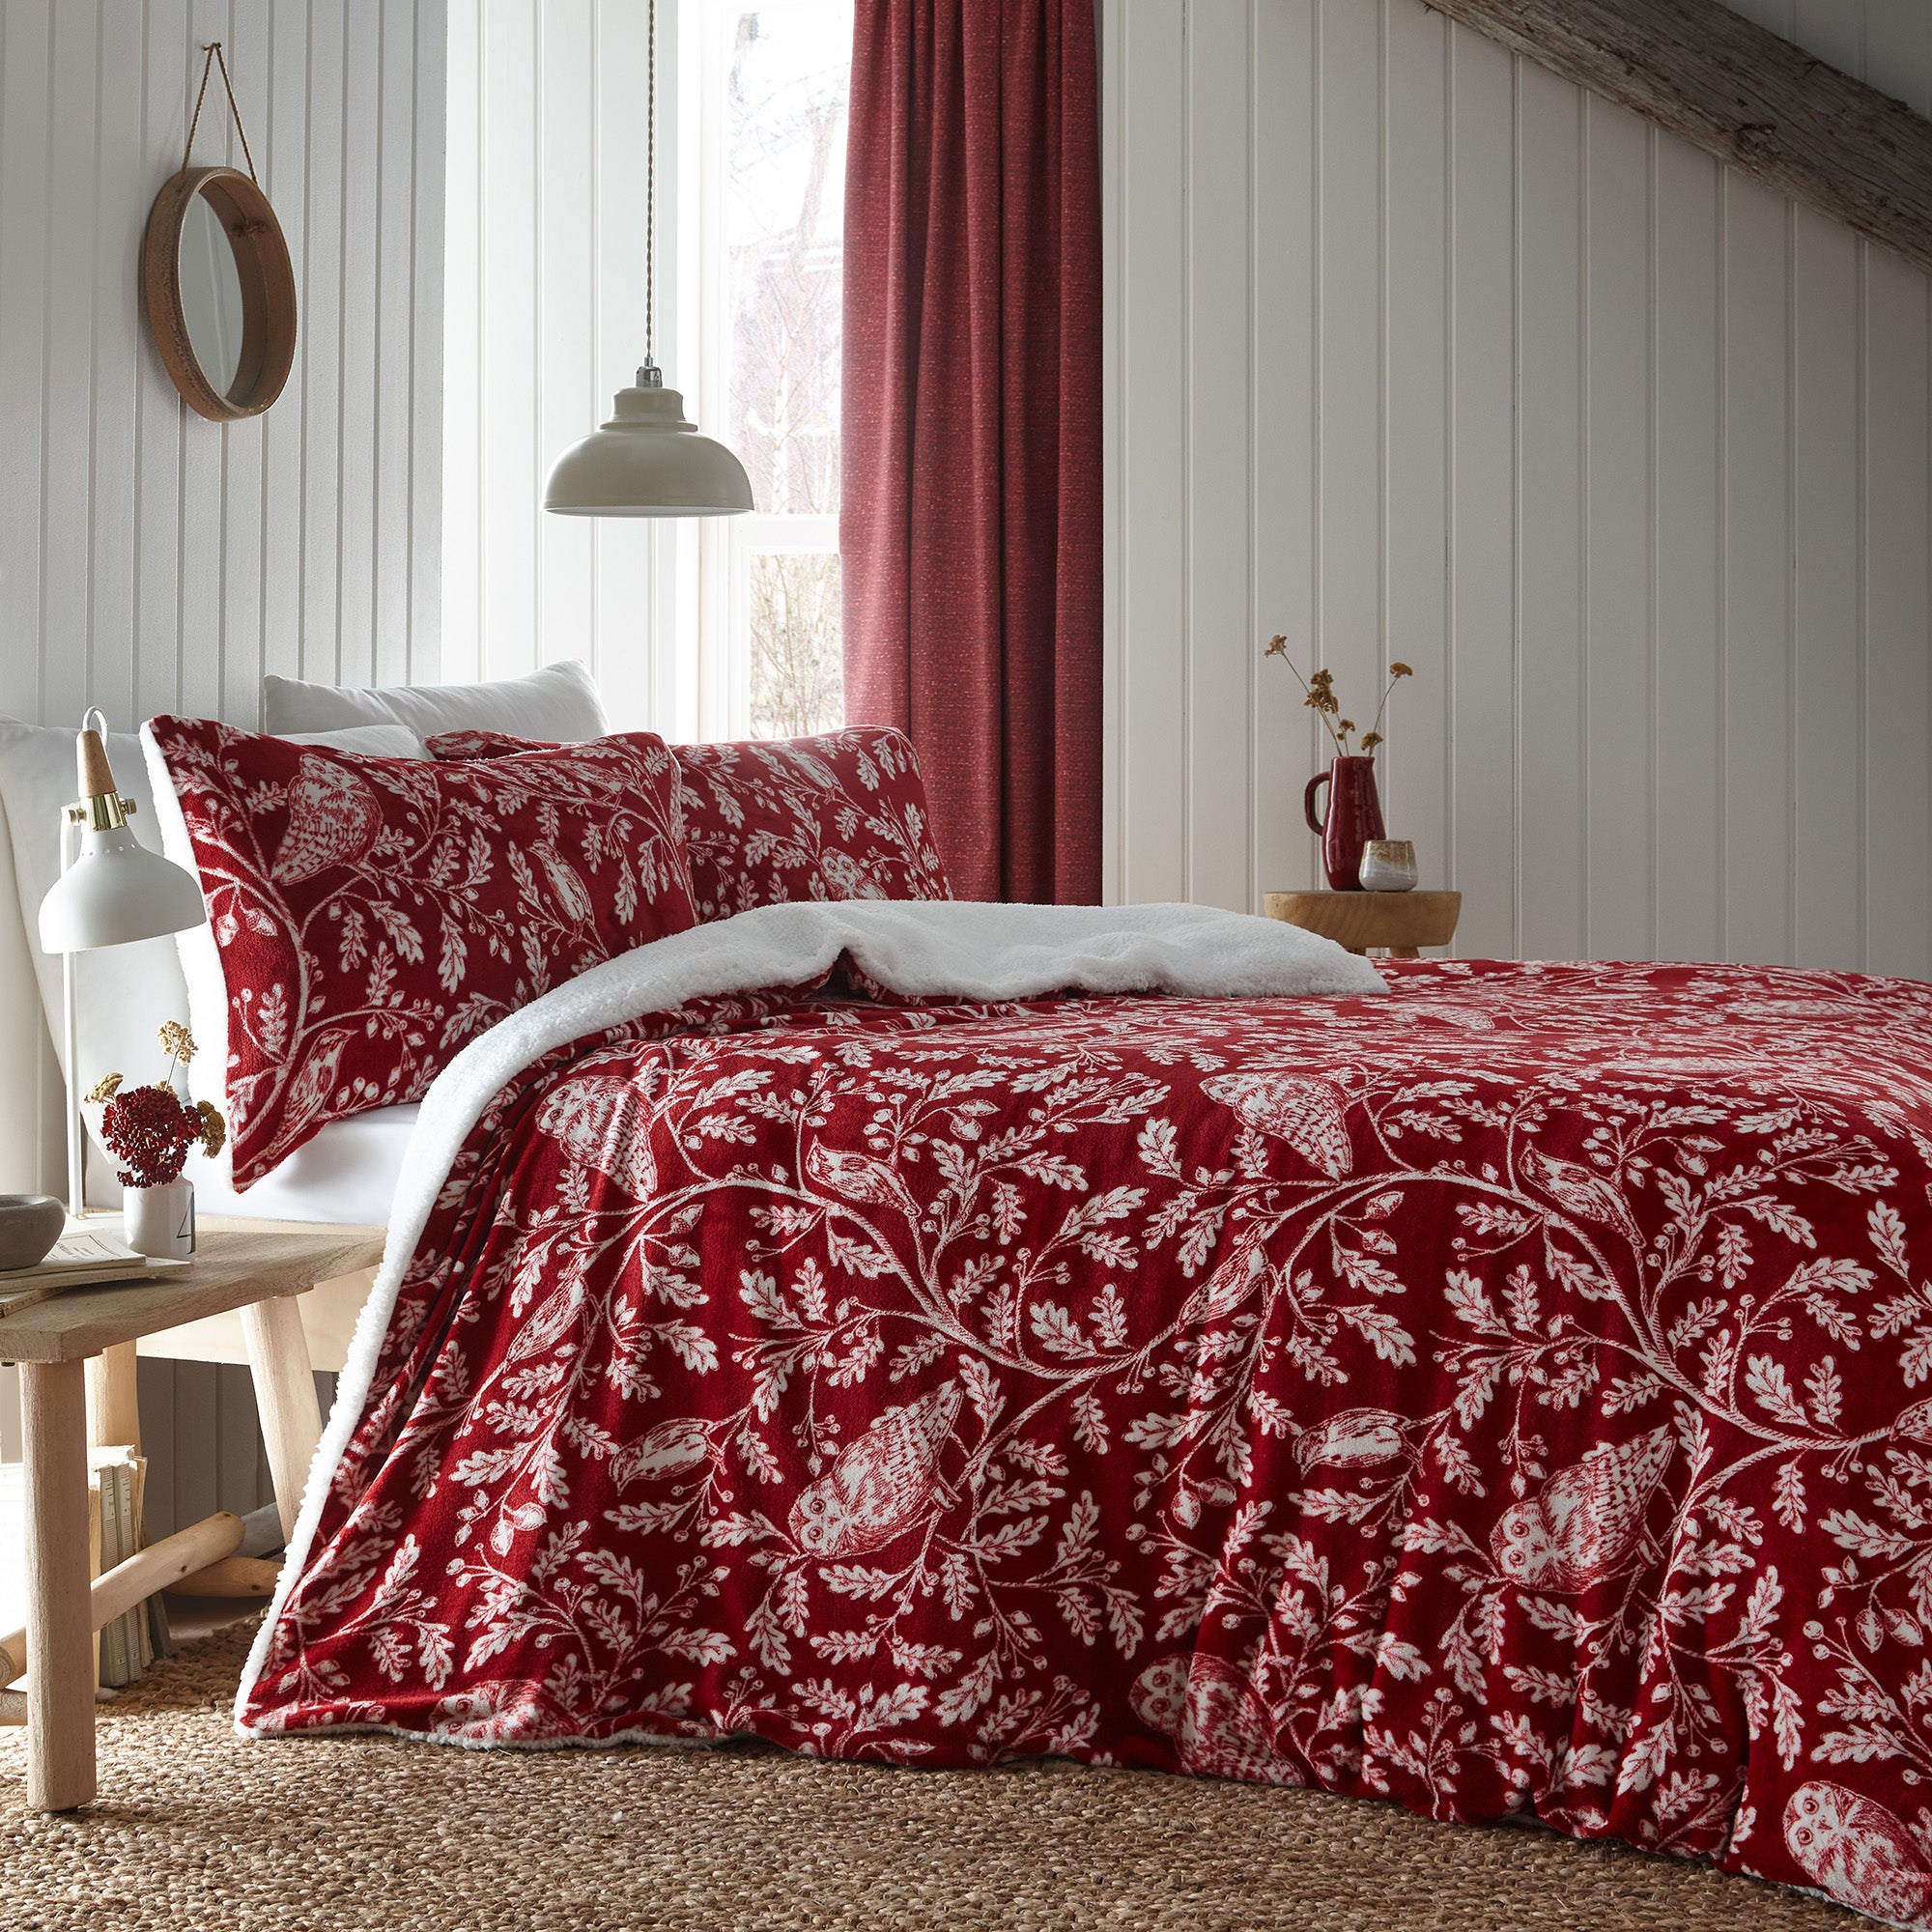 Dreams and Drapes Lodge Woodland Owls Red Duvet Cover and Pillowcase Set Red